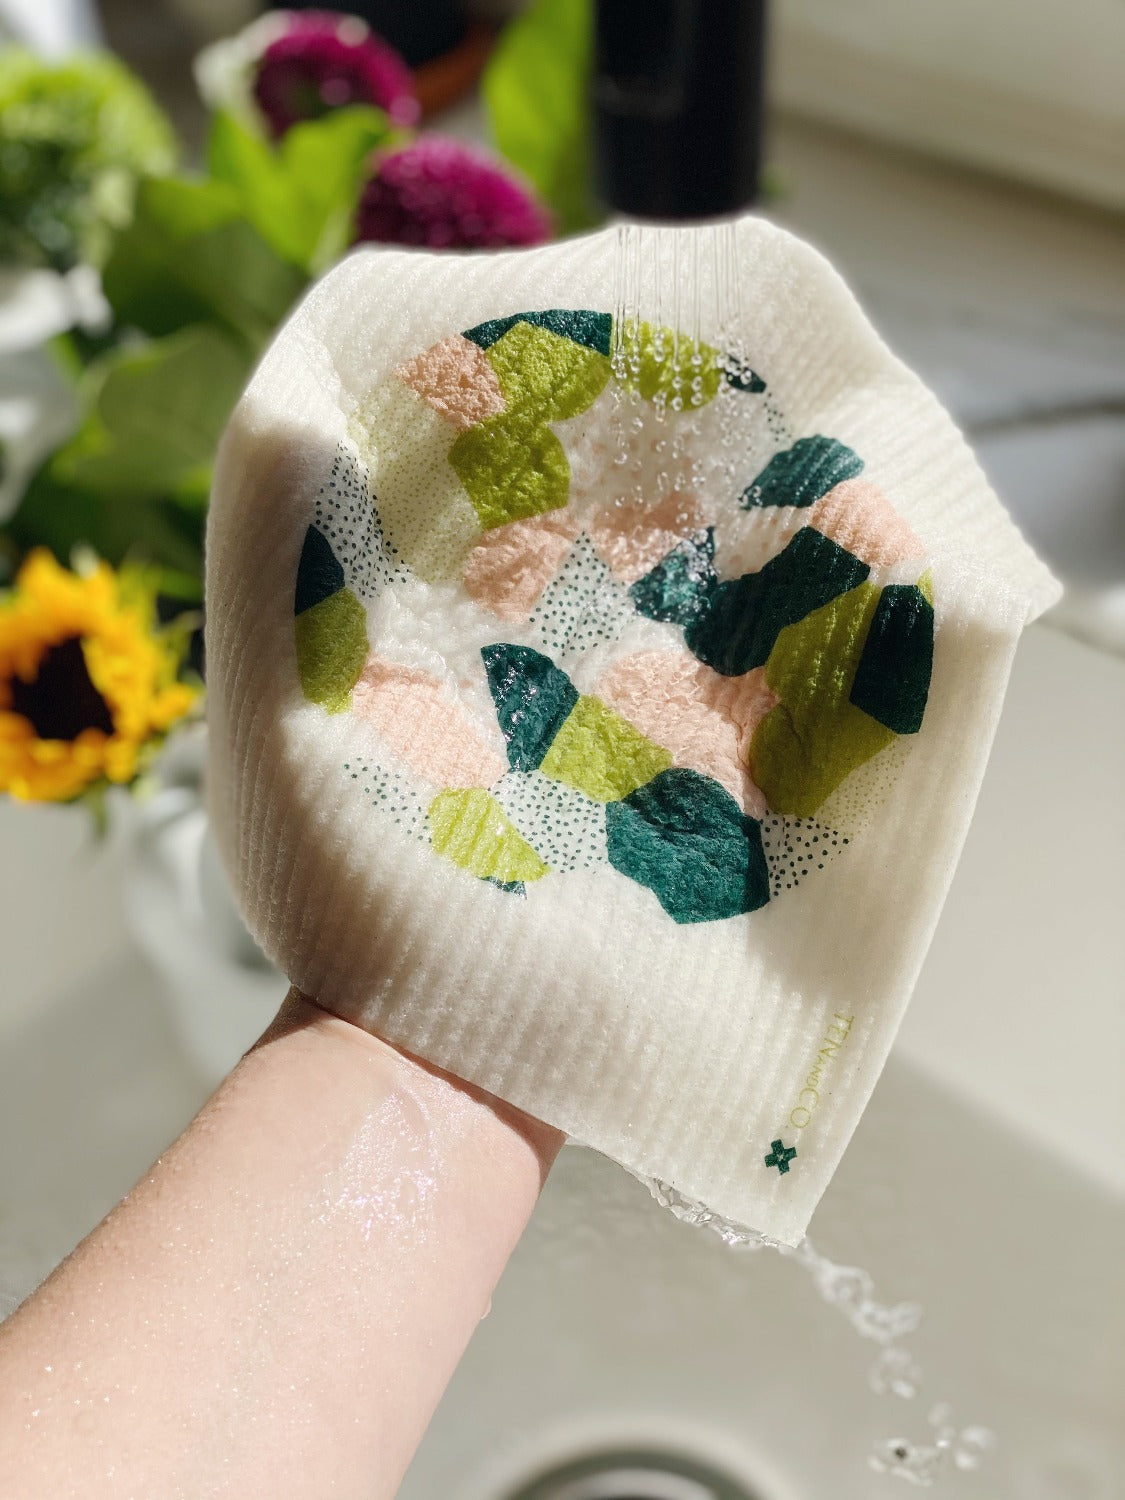 Product image of Full Circle Sponge cloth. There is a hand coming out of the bottom of the image over a kitchen sick. There is sunlight shining on the wet, drippping sponge cloth. There is a bouquet of flowers in the background in the top left. 